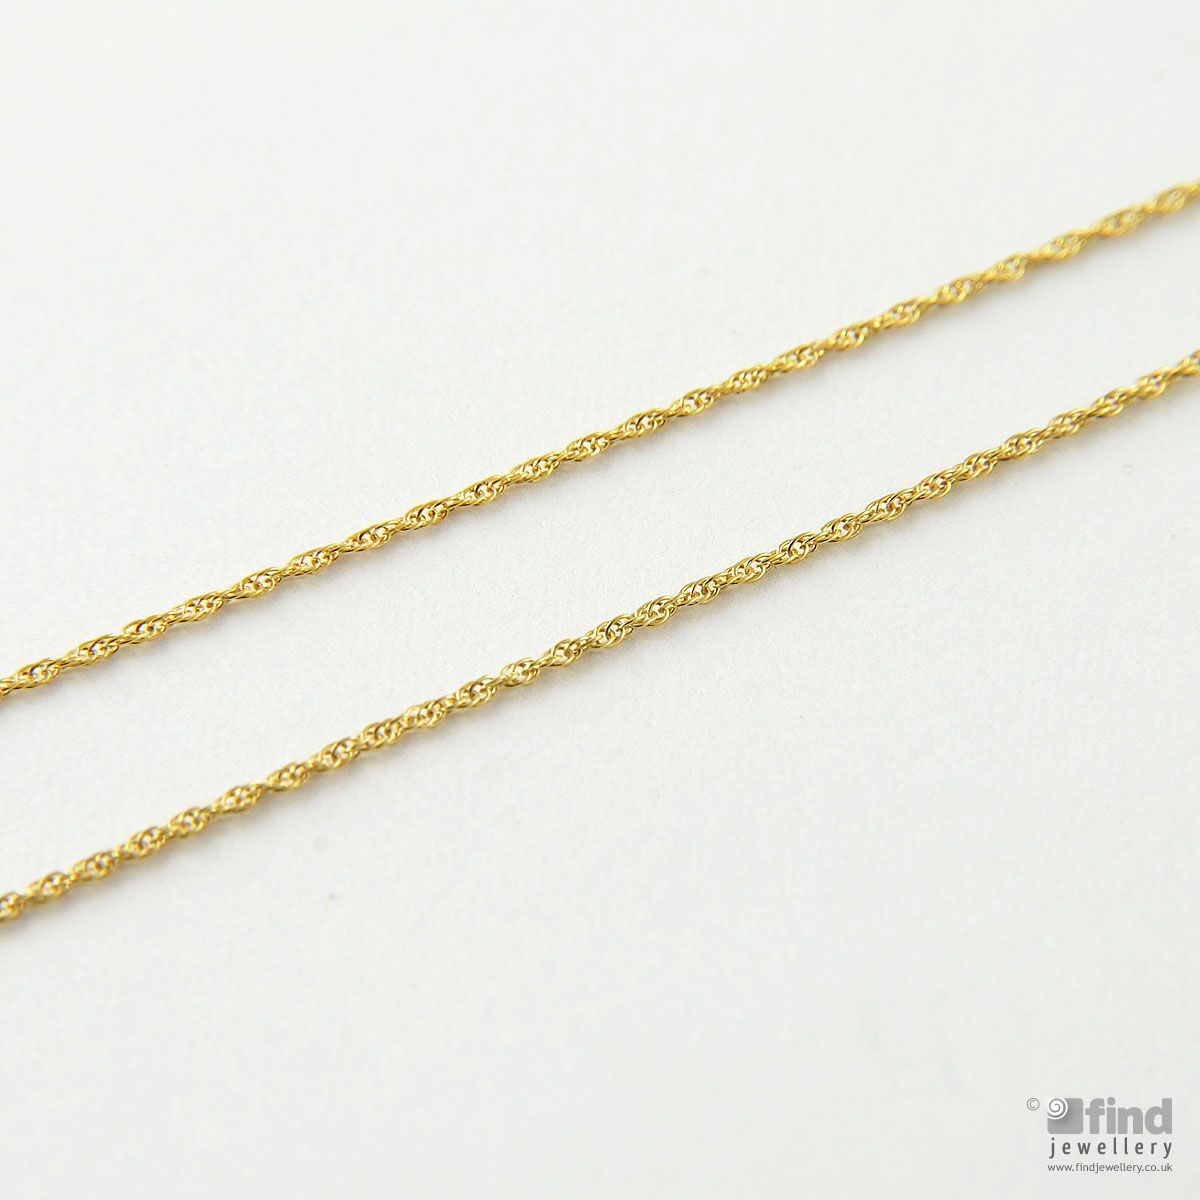 Unbranded 18 inch 9ct Yellow Gold Prince of Wales Chain